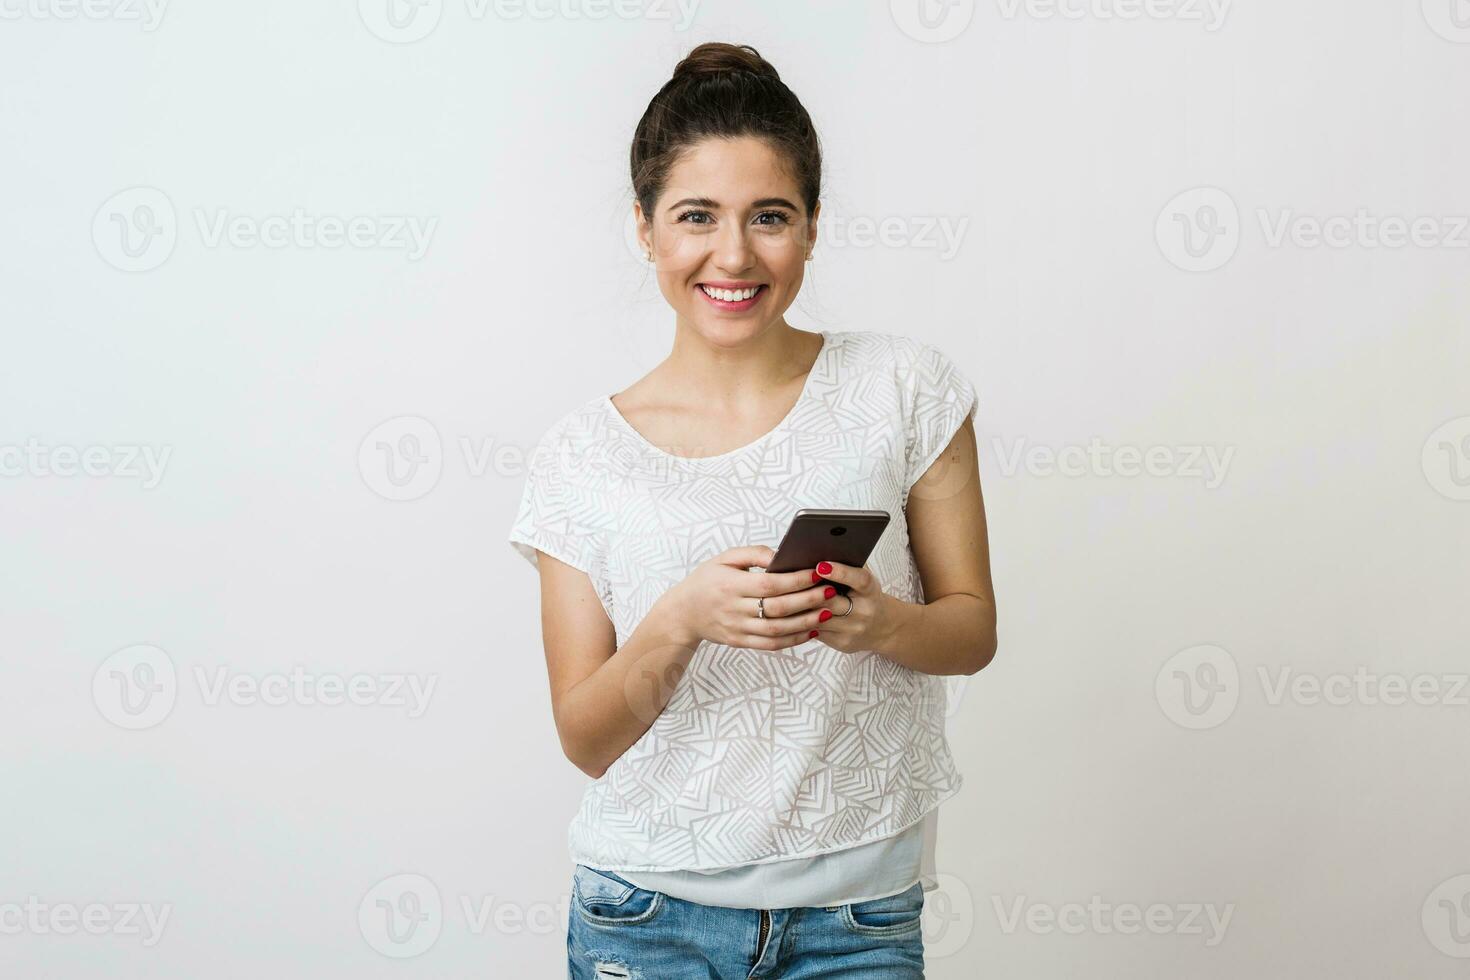 young pretty woman smiling in white t-shirt on white background, holding and using smartphone, mobile device, isolated photo